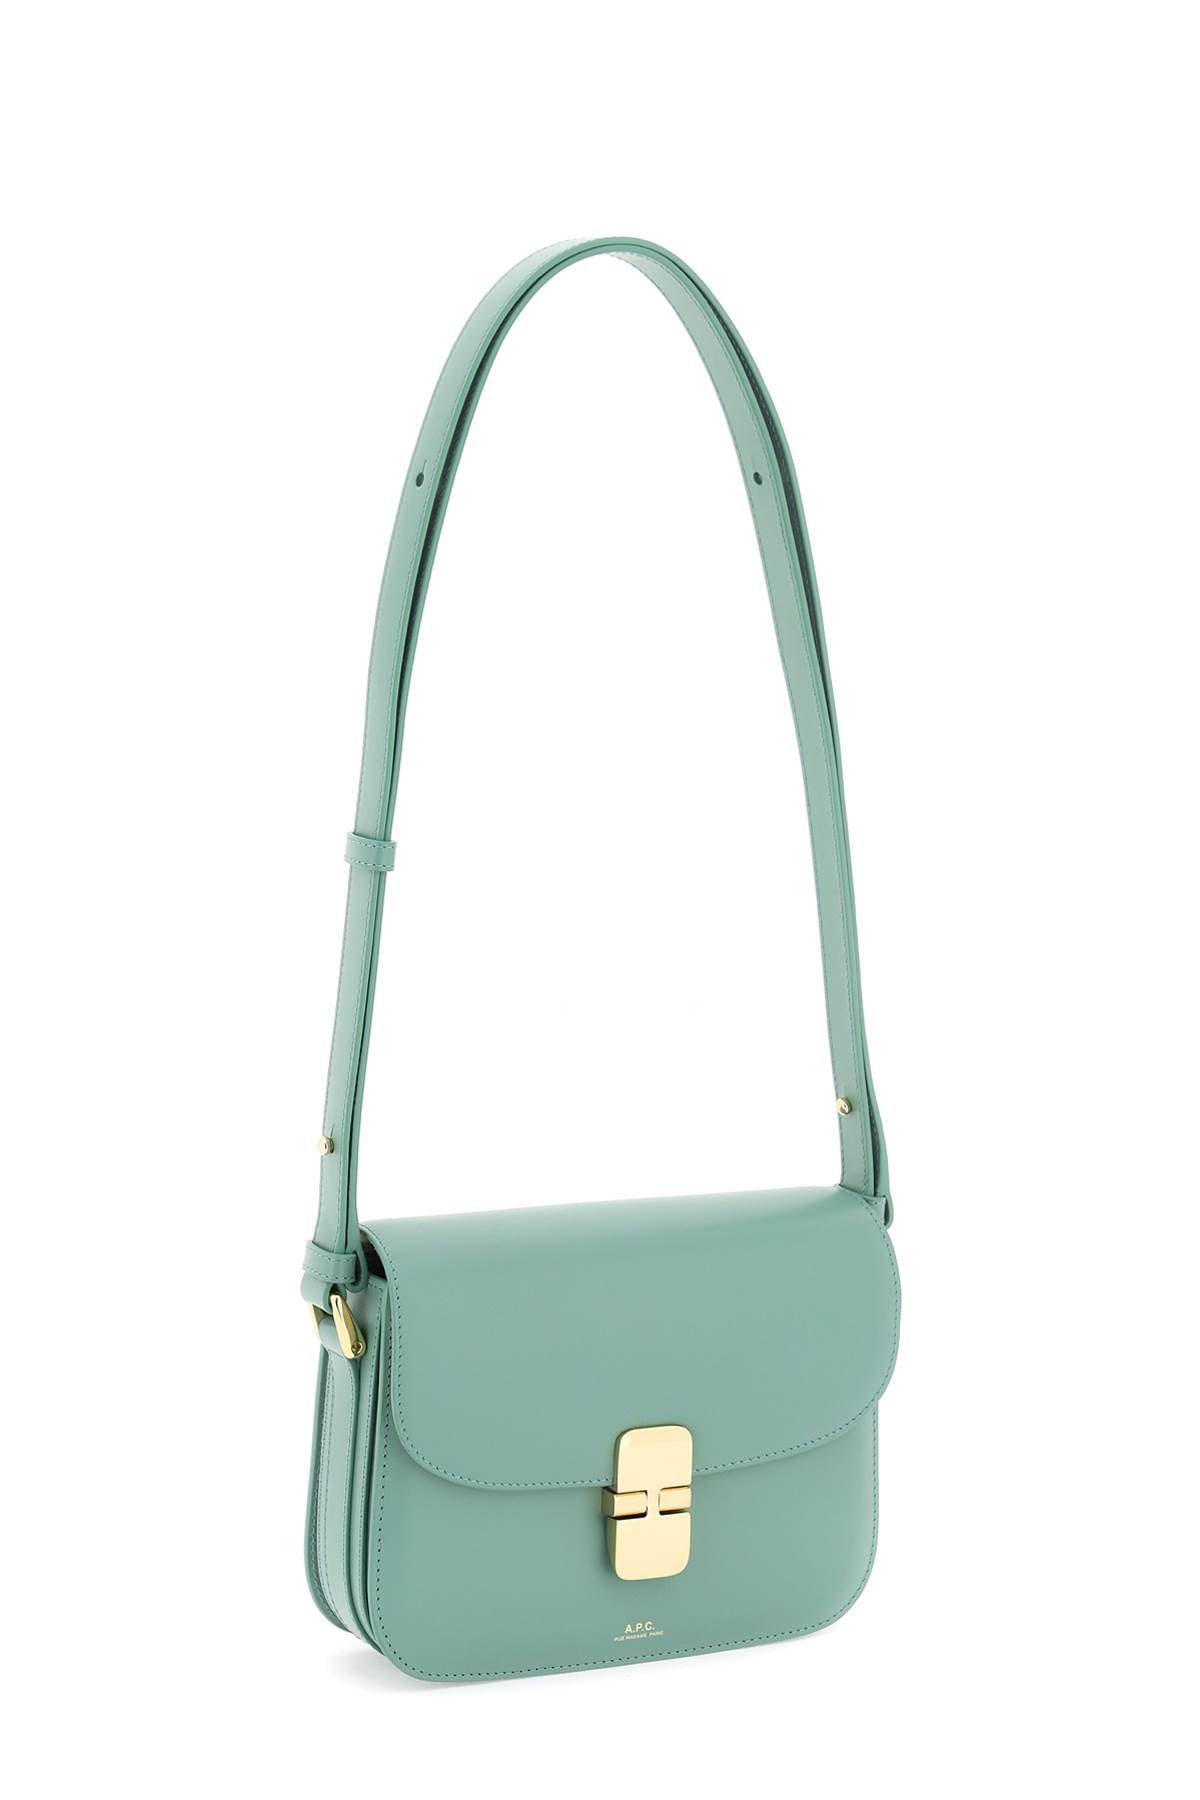 A.P.C. Grace Small Green Leather Crossbody Bag with Gold-Tone Accents and Adjustable Strap